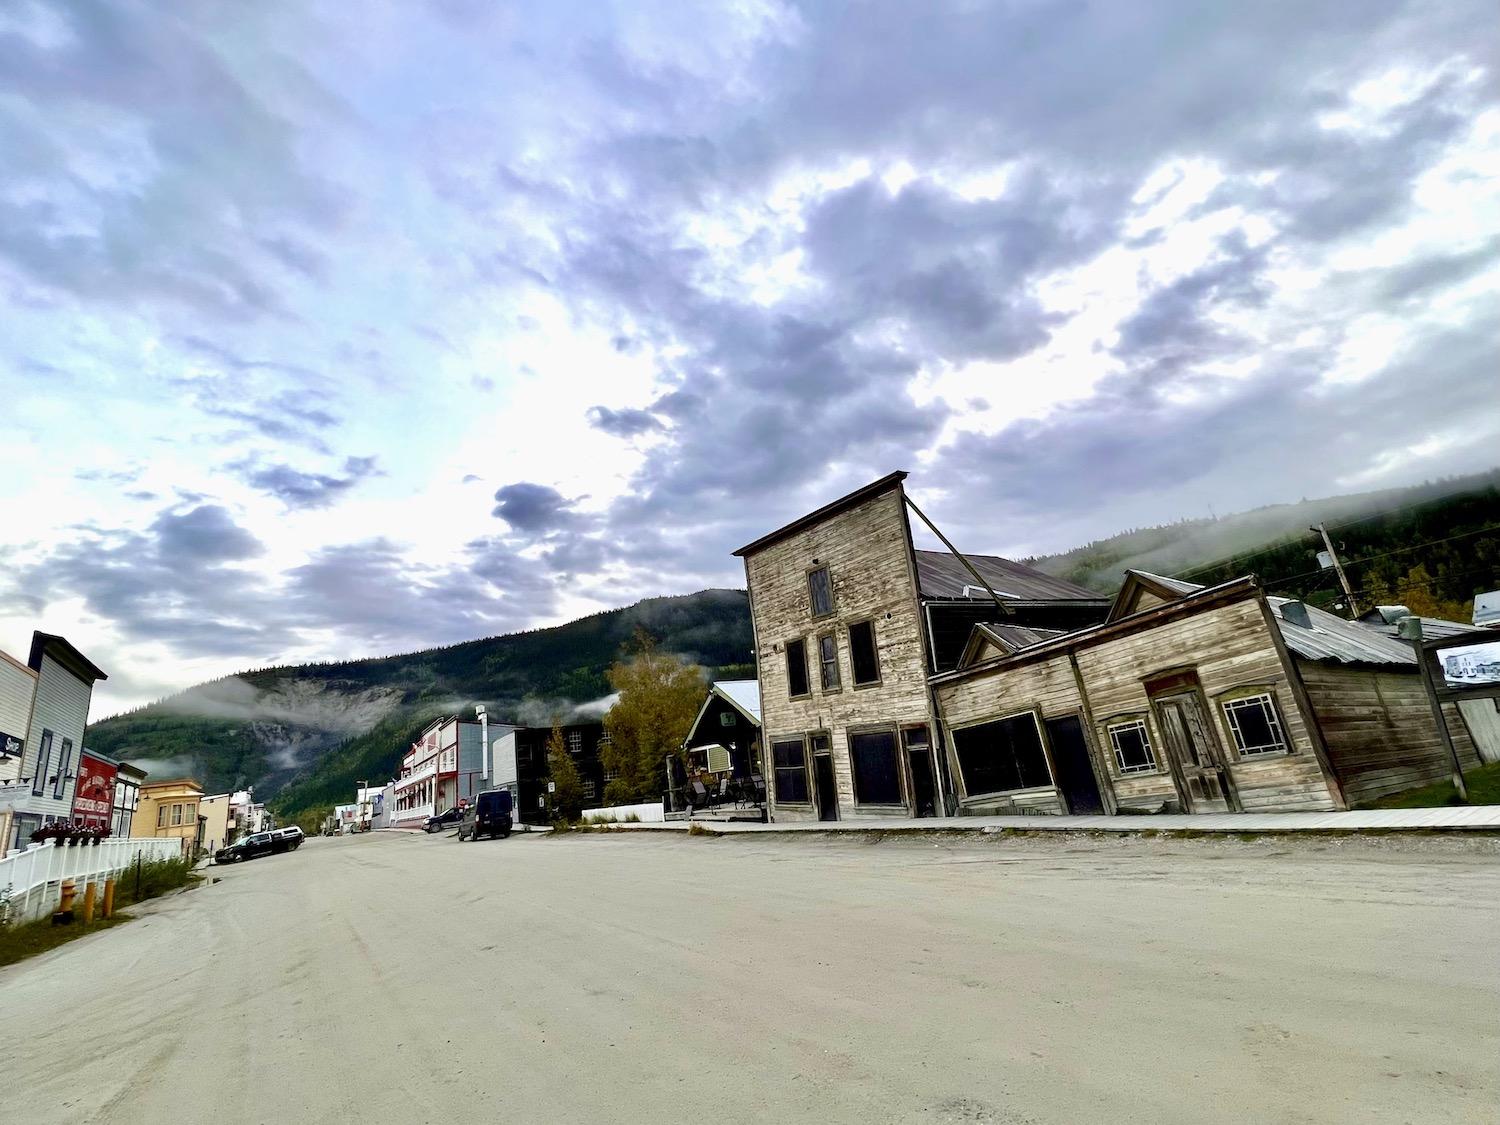 Dawson City today is a vibrant town full of heritage buildings.